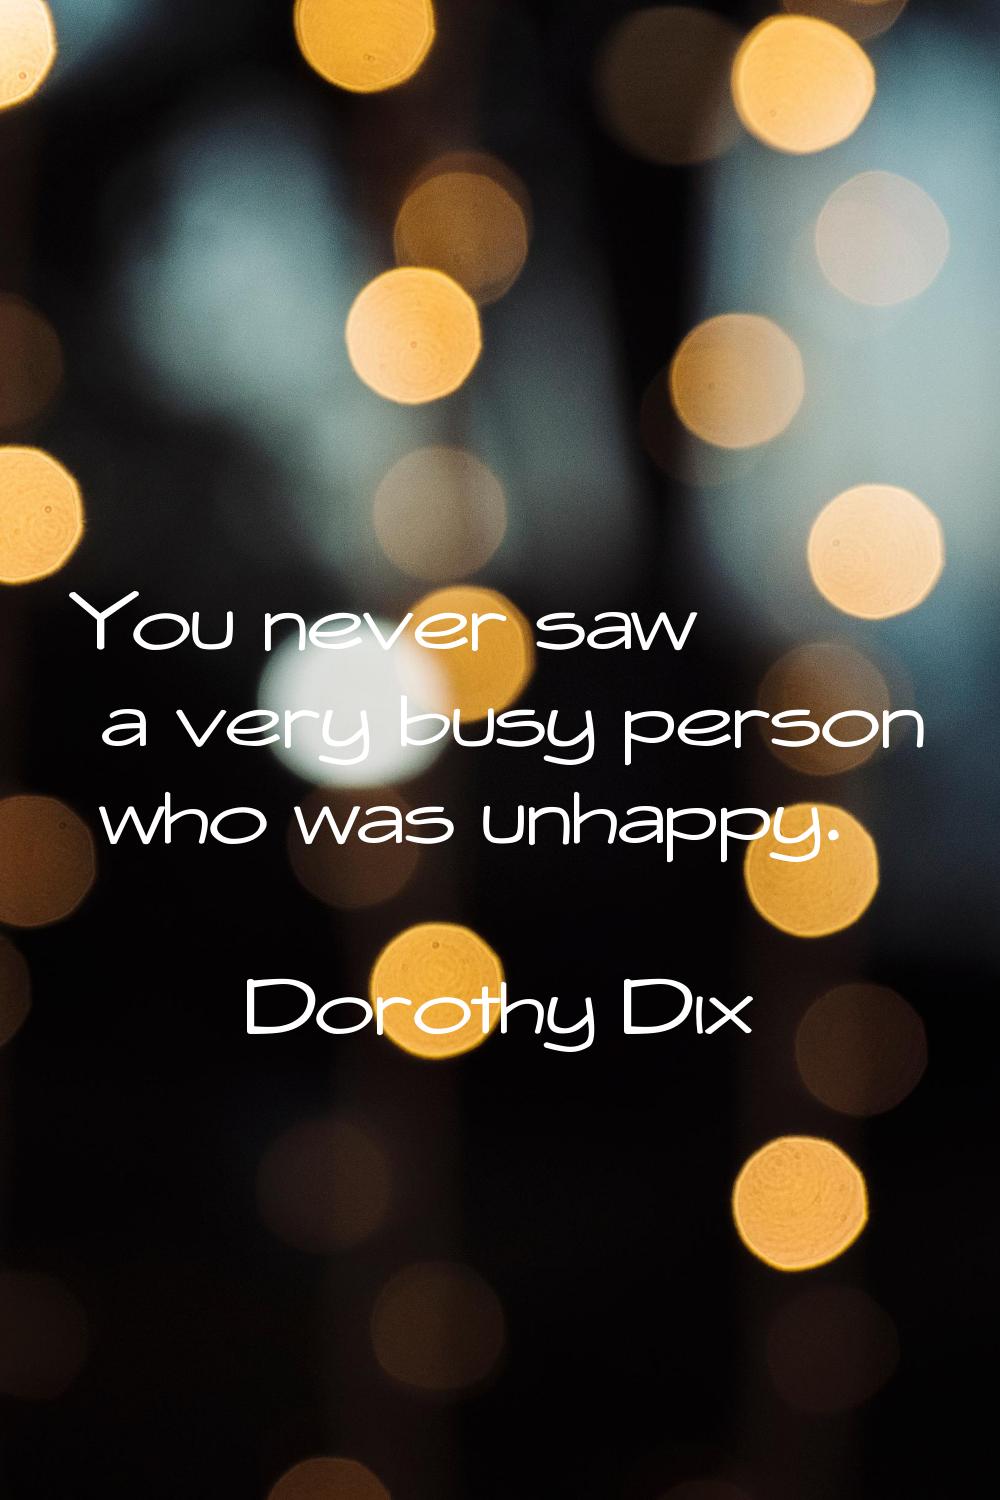 You never saw a very busy person who was unhappy.